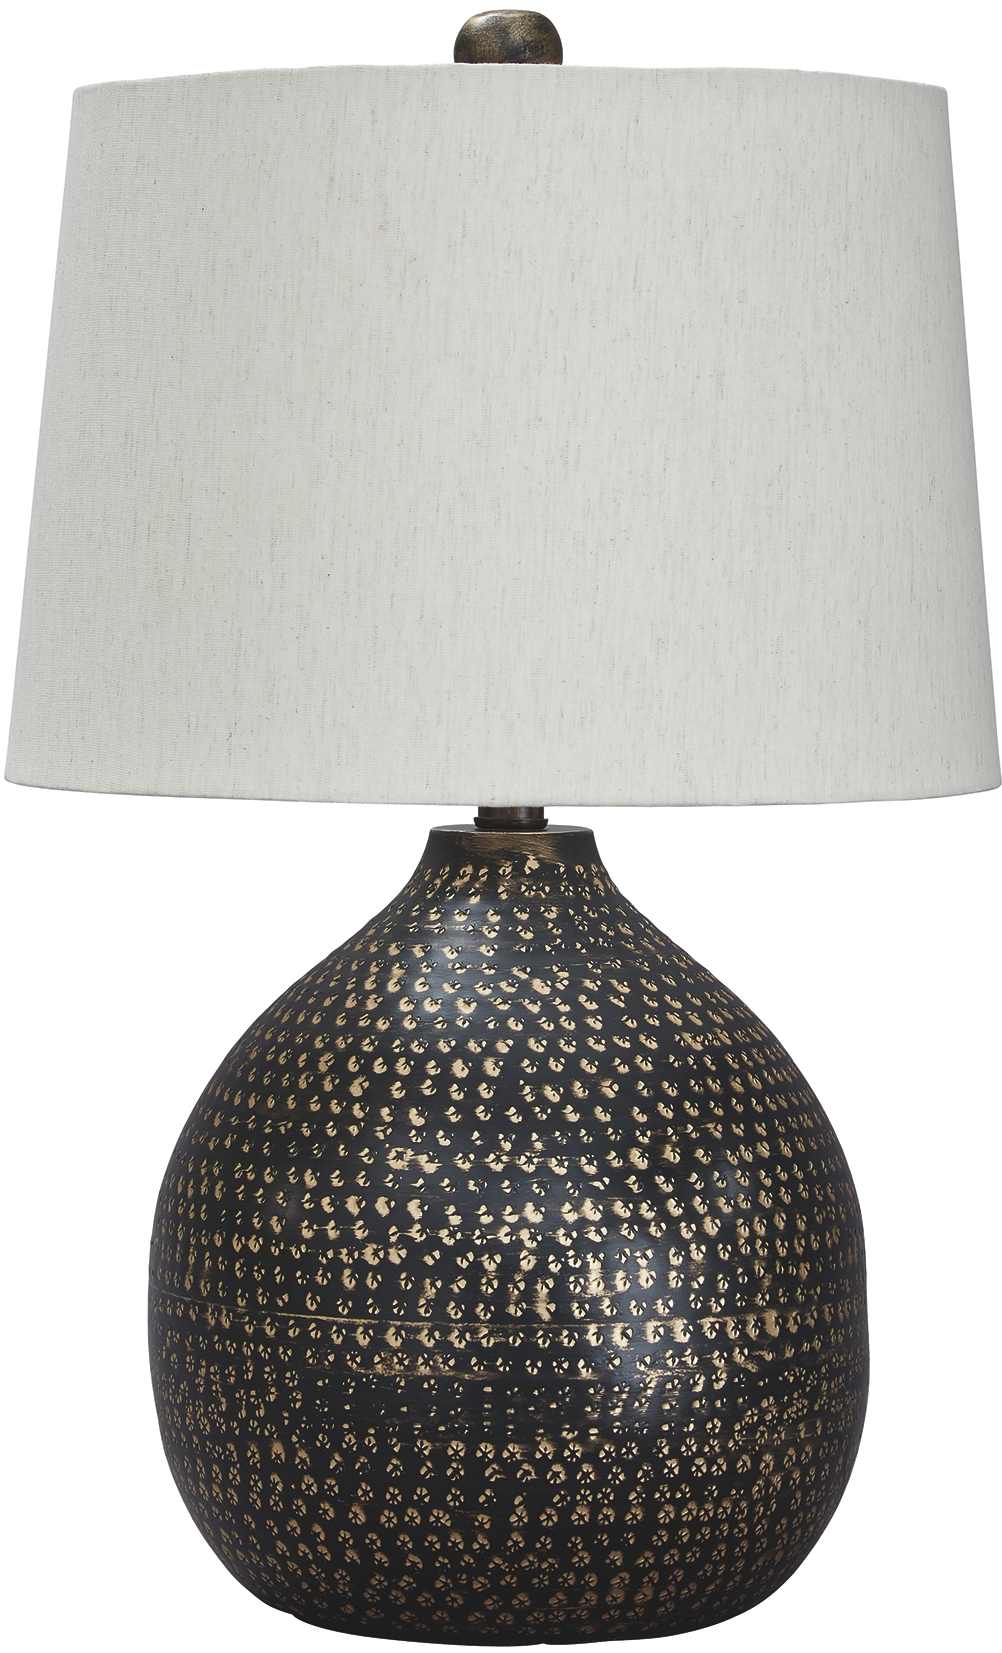 Signature Design by Ashley® Maire Antique Gold Finish Table Lamp